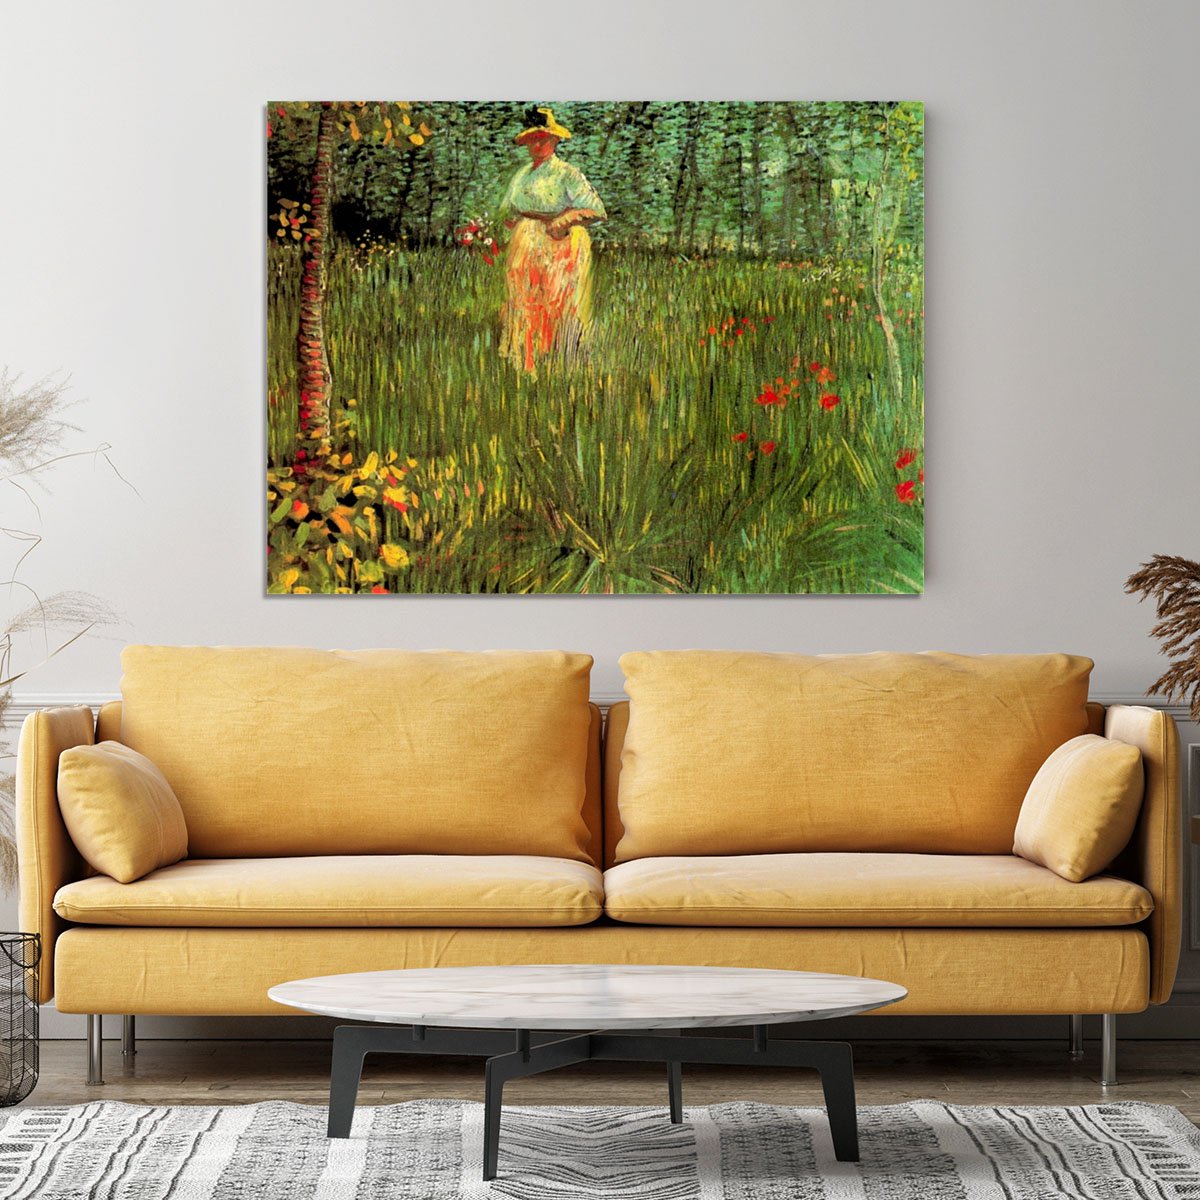 A Woman Walking in a Garden by Van Gogh Canvas Print or Poster